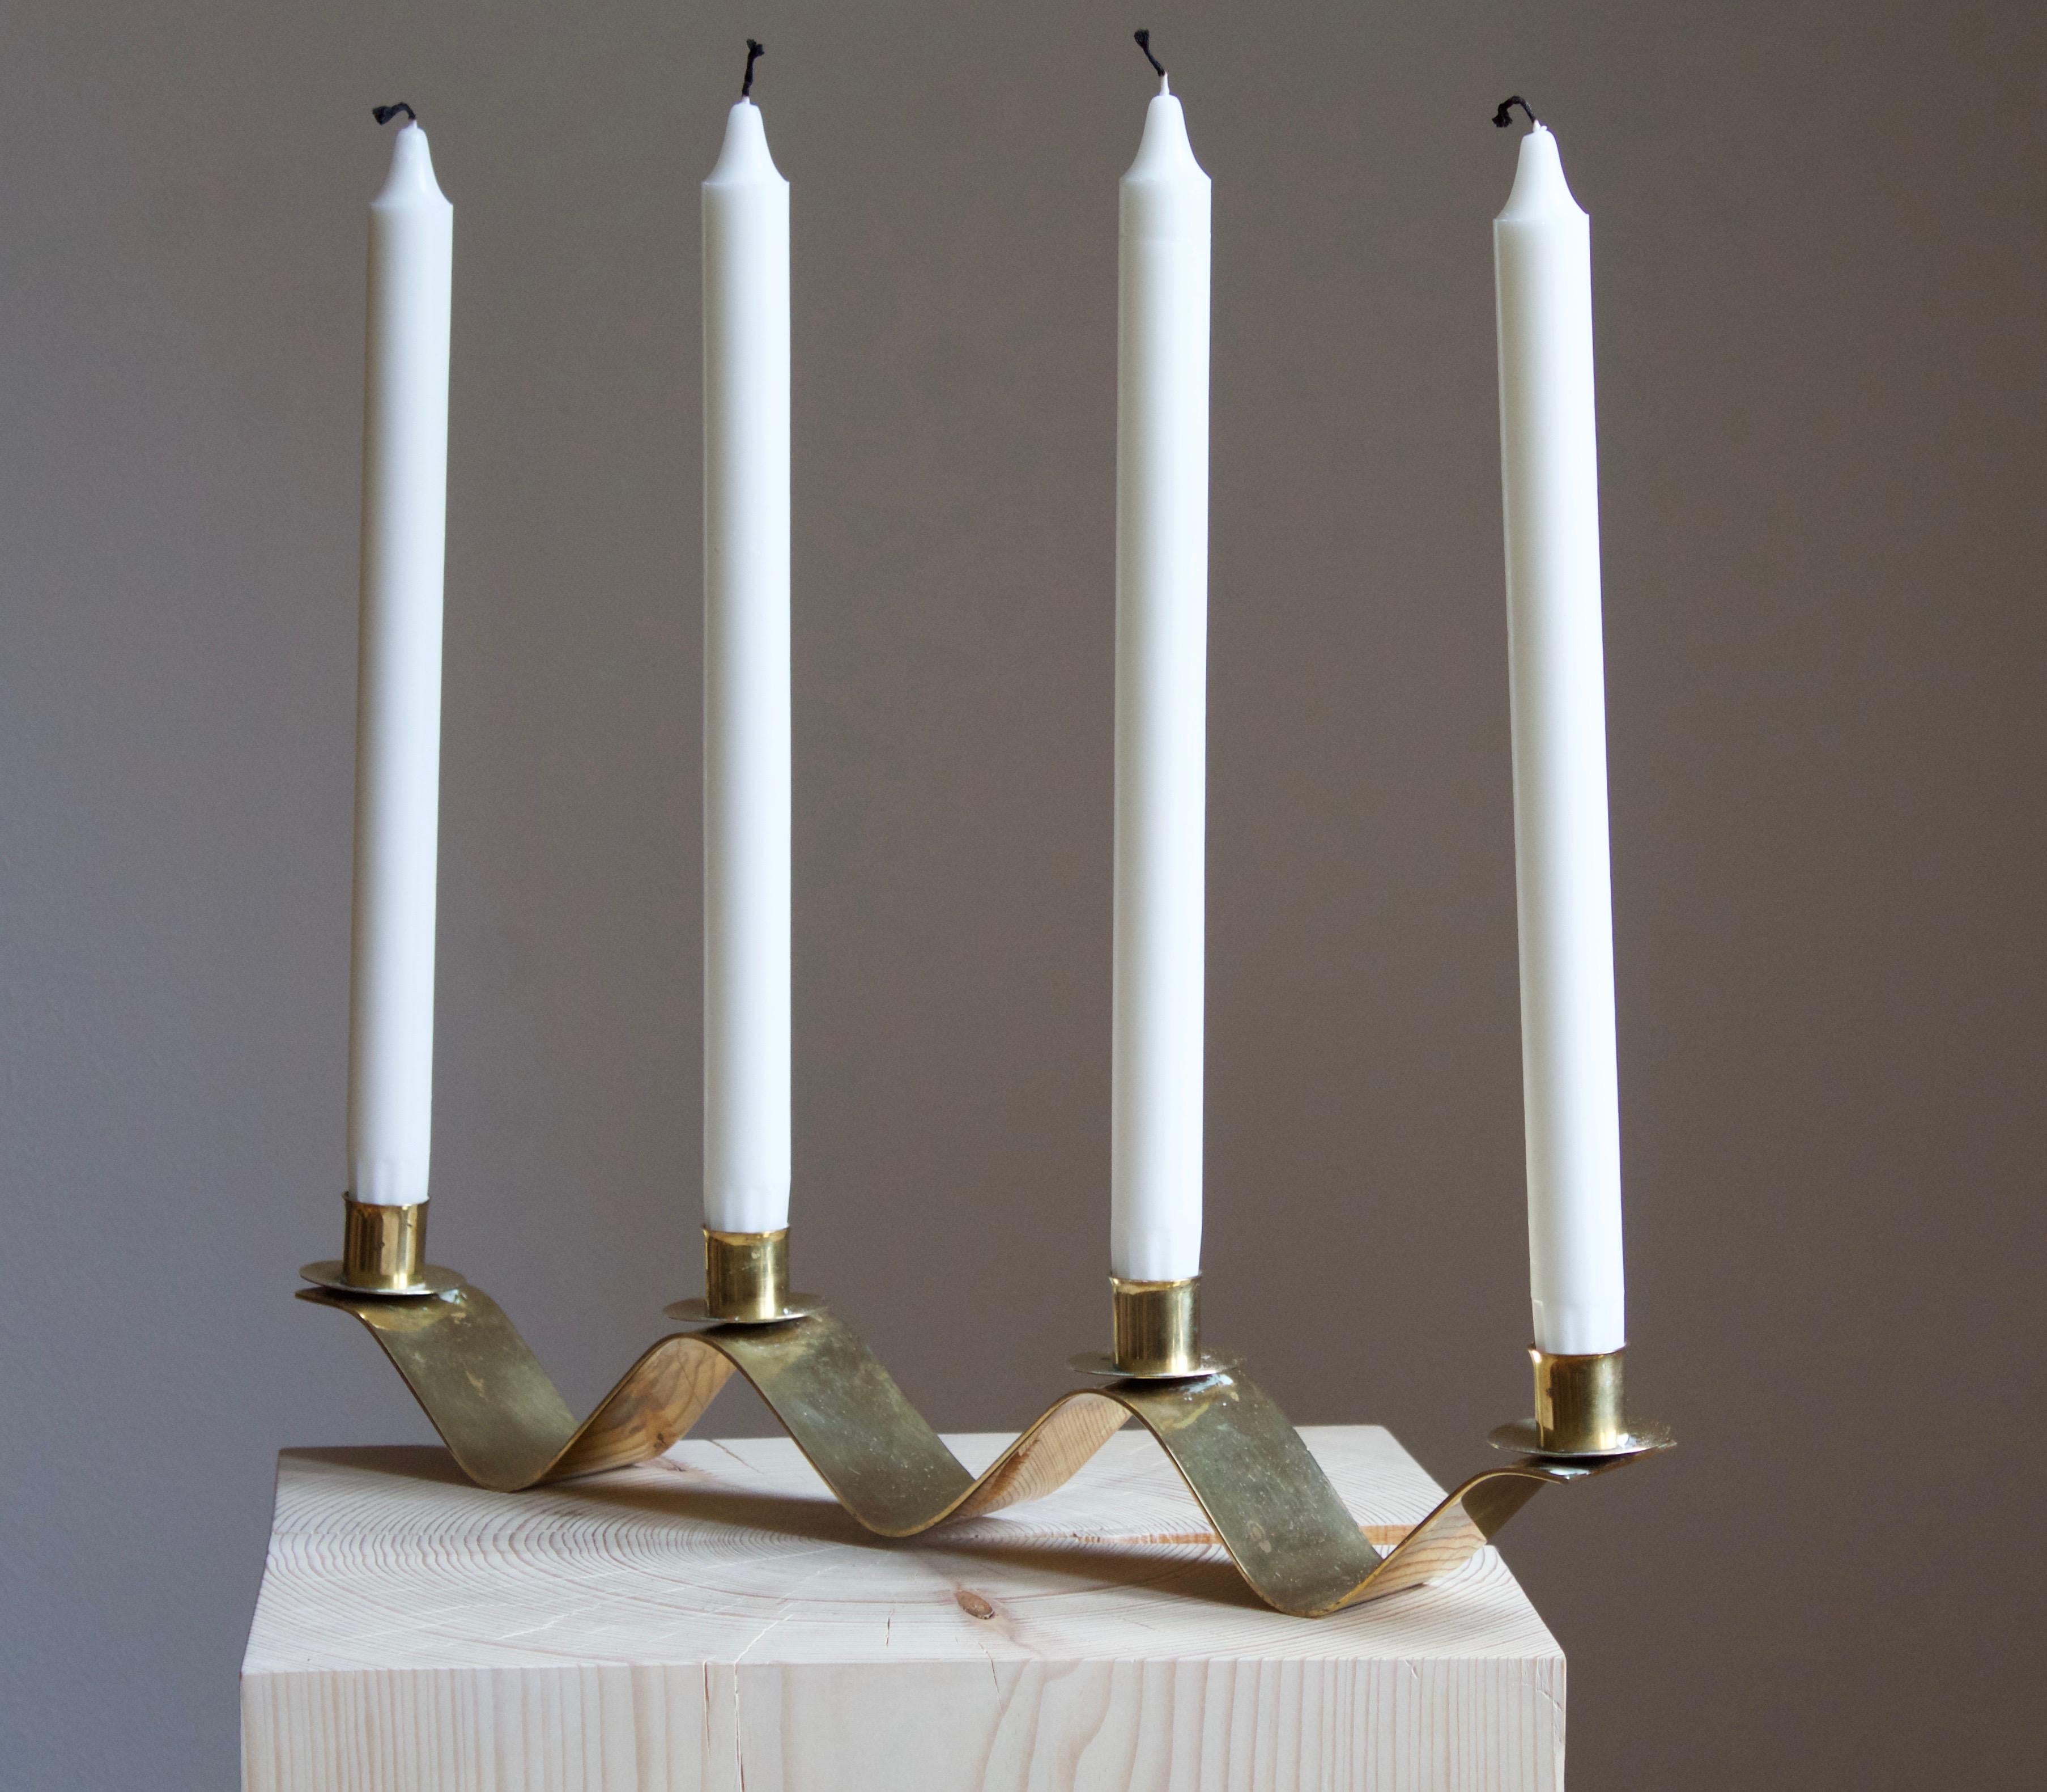 A candelabra, designed and produced in Sweden, c. 1940s-1950s.

